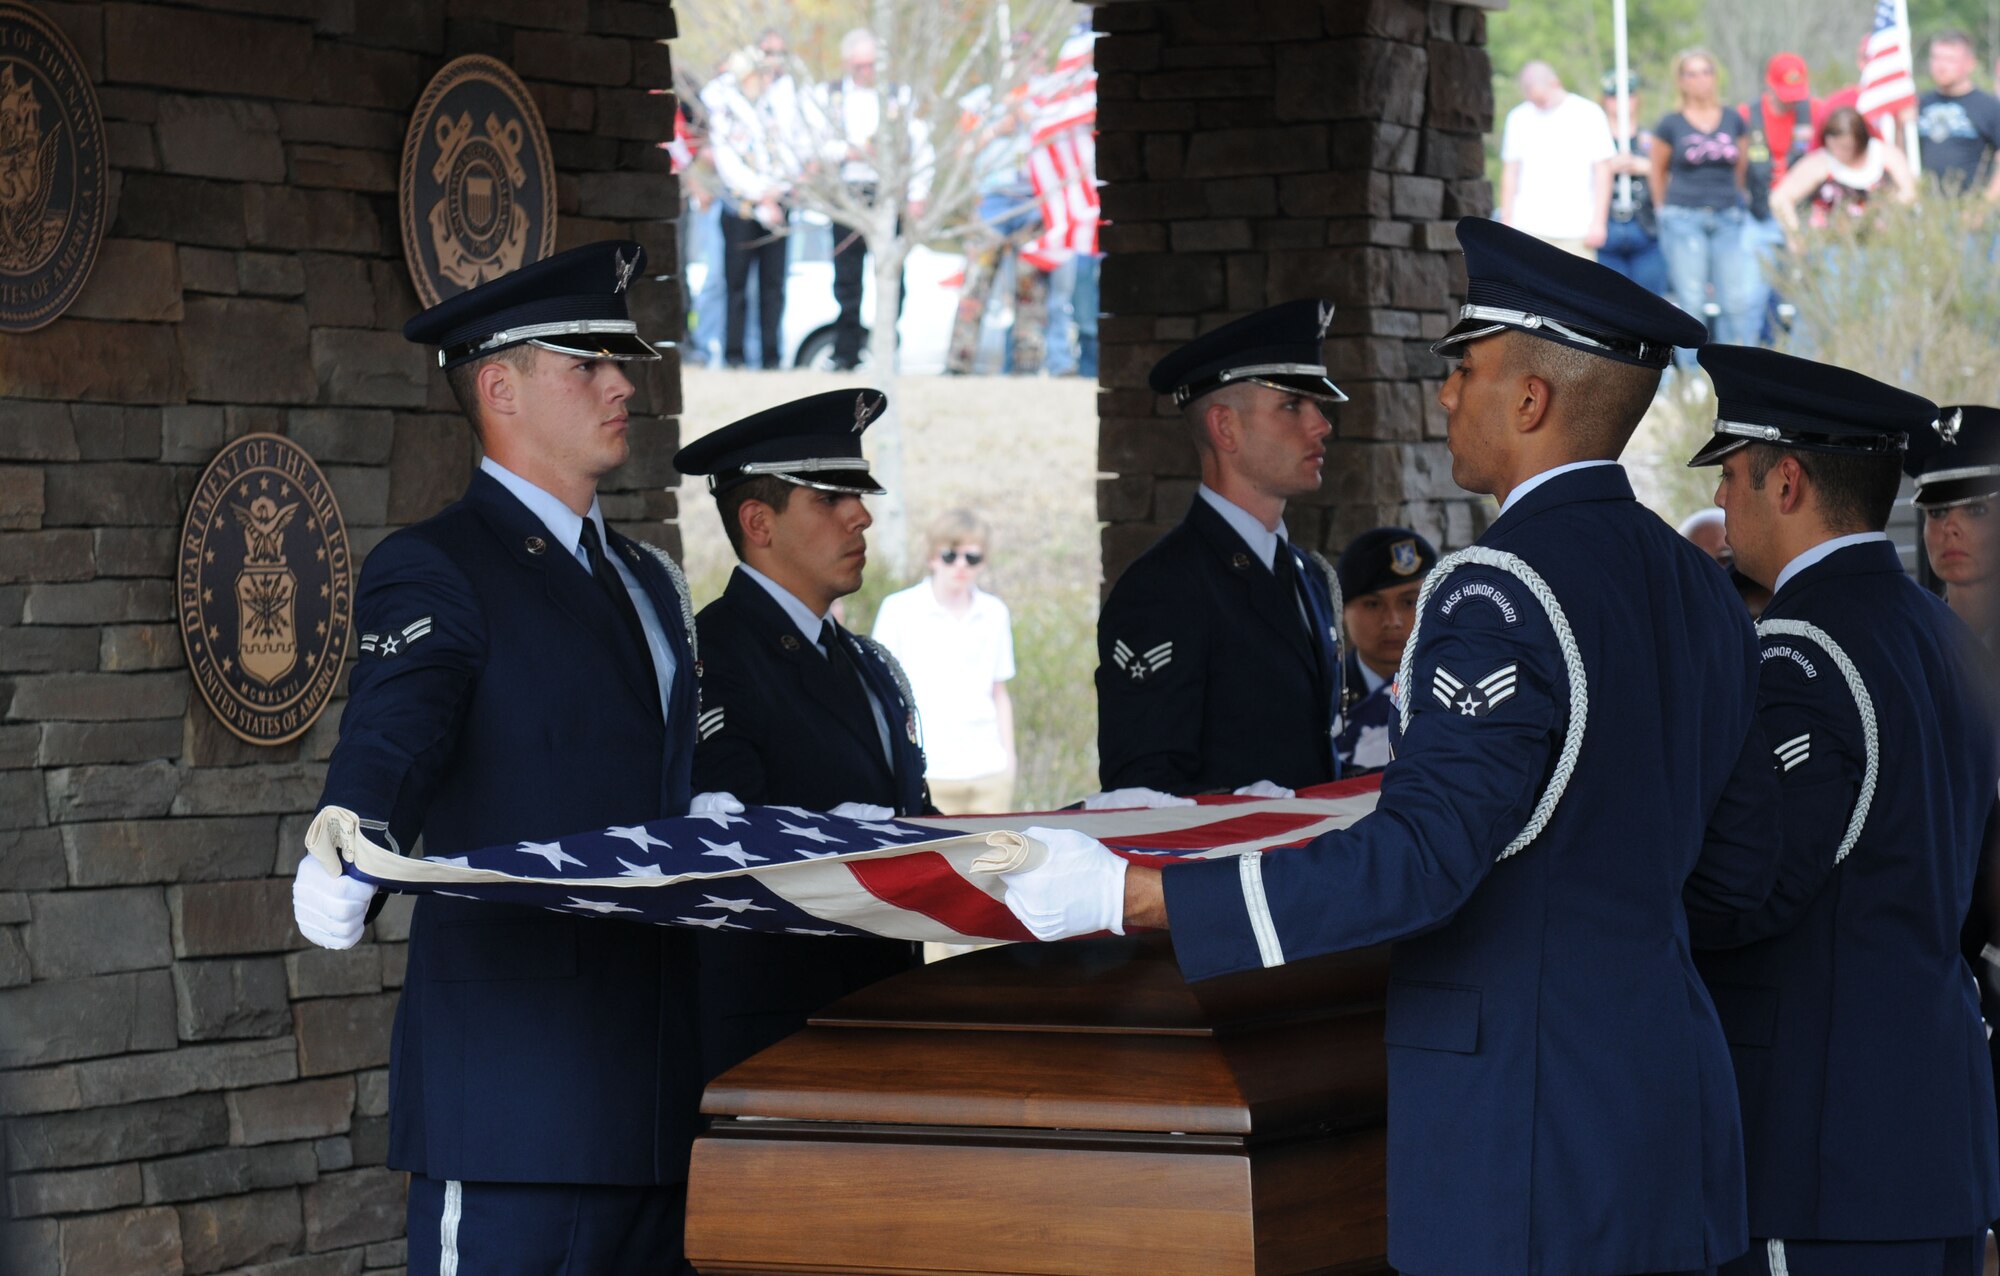 ANDERSON, S.C. - Shaw Air Force Base honor guard folds the U.S. flag of Senior Airman Nicholas J. Alden, Anderson, S.C., March 19, 2011. Airman Alden, assigned to the 48th Security Forces Squadron, Royal Air Force Lakenheath, England, was killed during a shooting March 2 at Frankfurt International Airport. More than 1,000 locals gathered to honor Airman Alden. (U.S. Air Force photo/Tech. Sgt. Vincent A. Mouzon (Released))